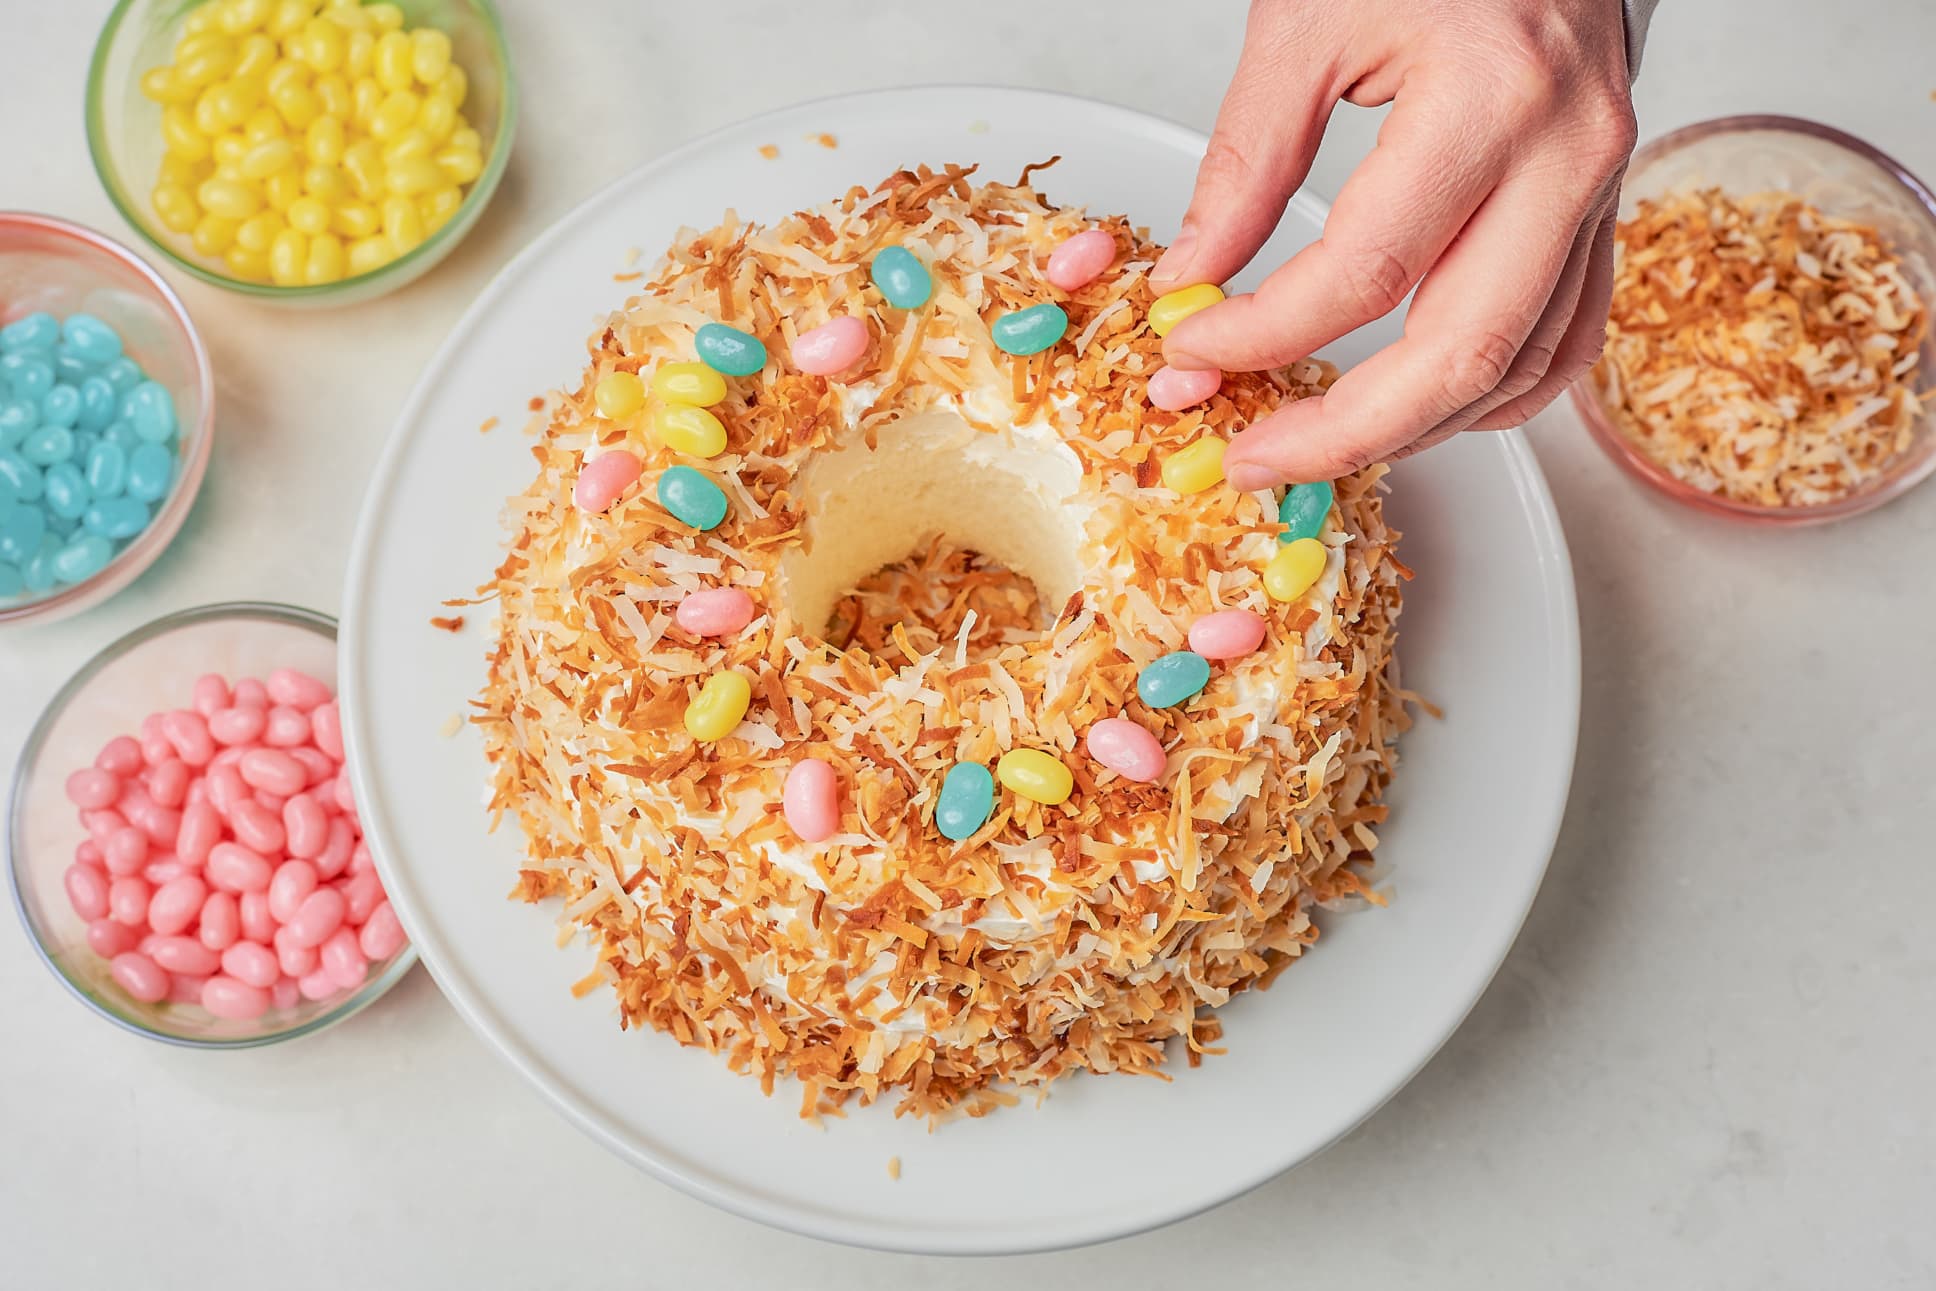 Egg-Ceptional Easter Cookies recipe